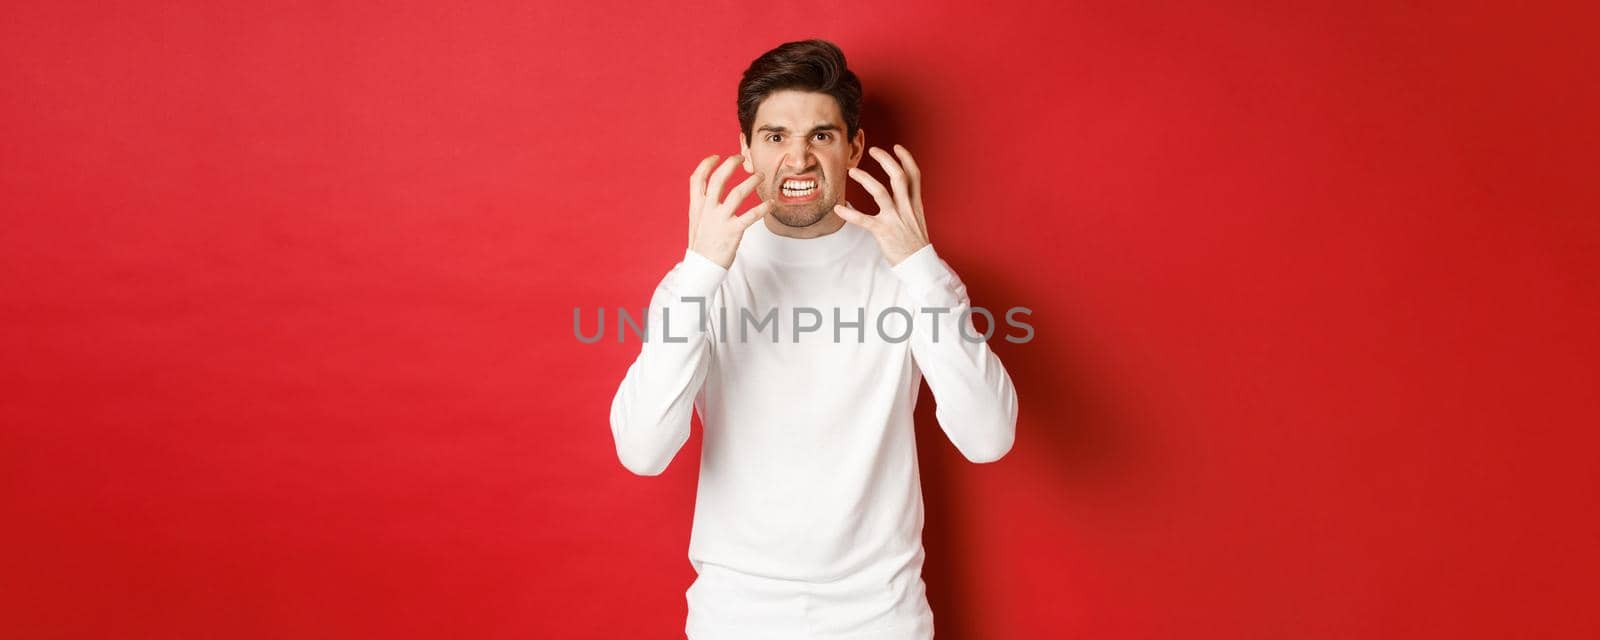 Image of angry and pissed-off man in white sweater, grimacing and shaking from rage, standing furious against red background.